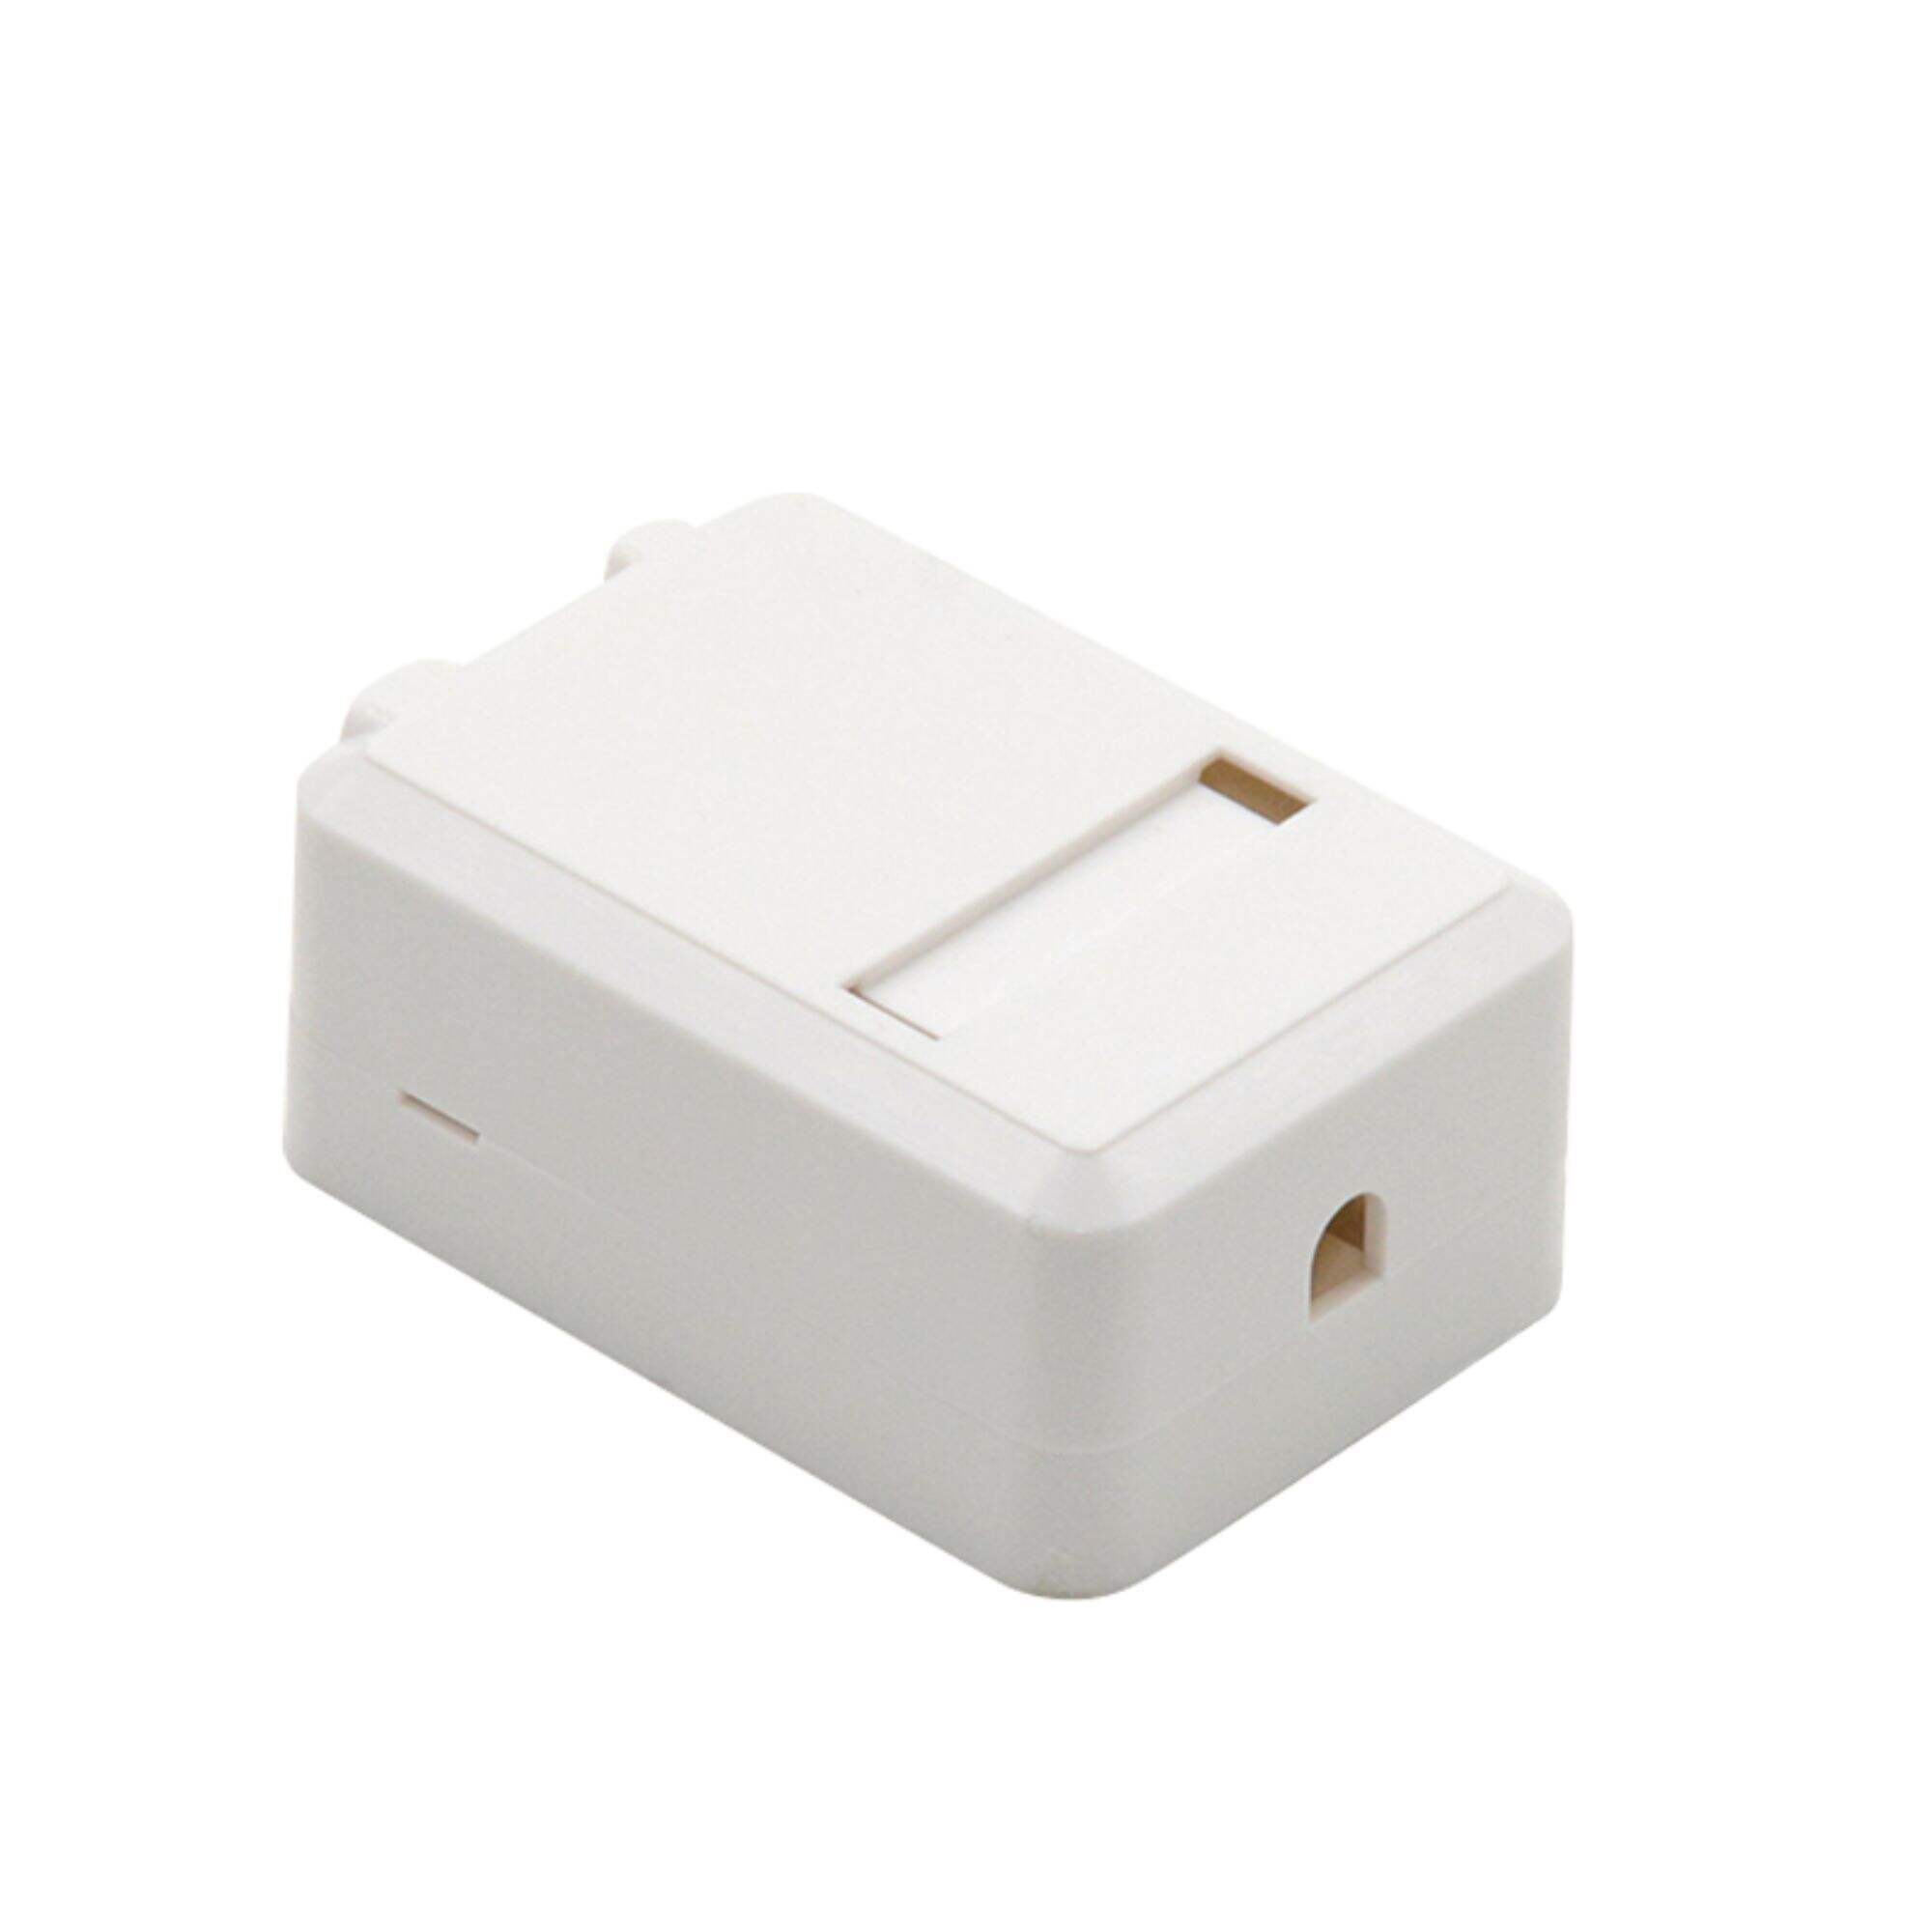 Cat5e Cat.6 Cat.6a Single Port RJ45 UTP Superficies Adscendens Box Wall Mounted Outlet Box